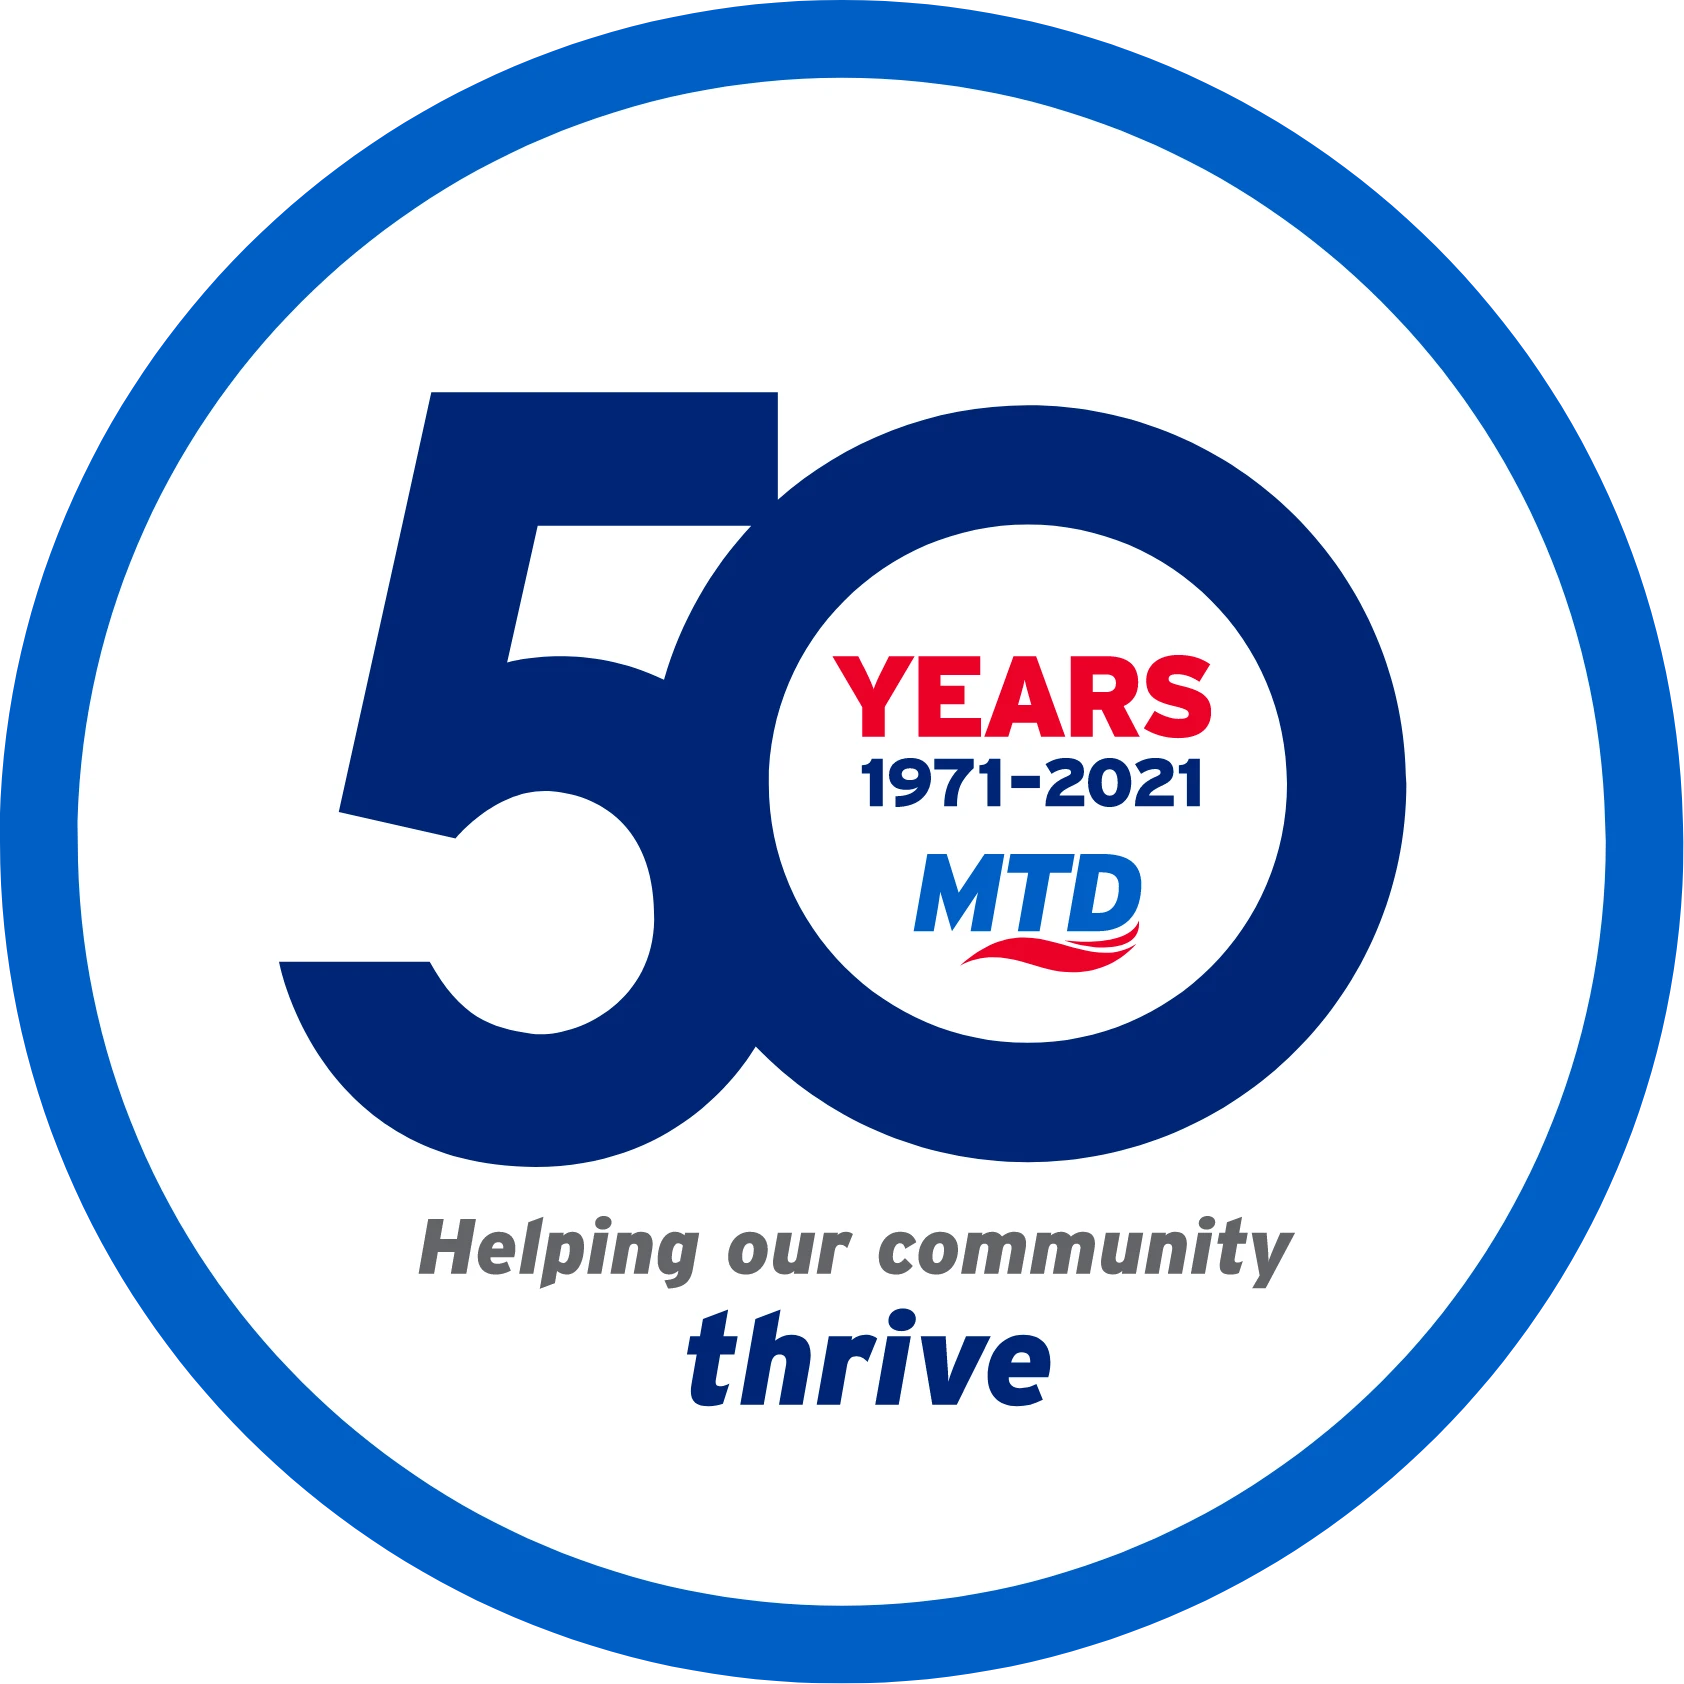 50 years of mtd helping our community thrive.